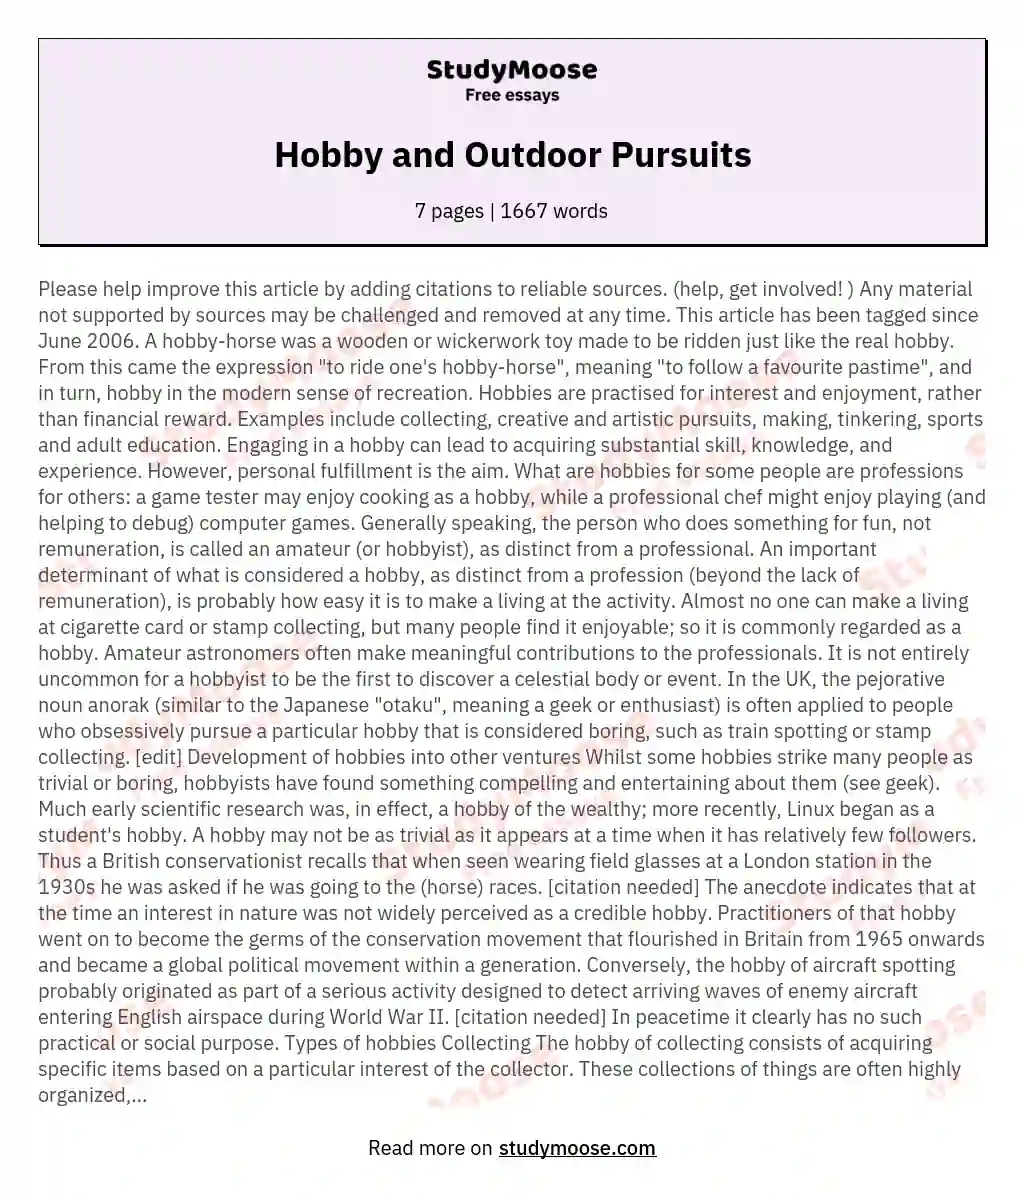 Hobby and Outdoor Pursuits essay